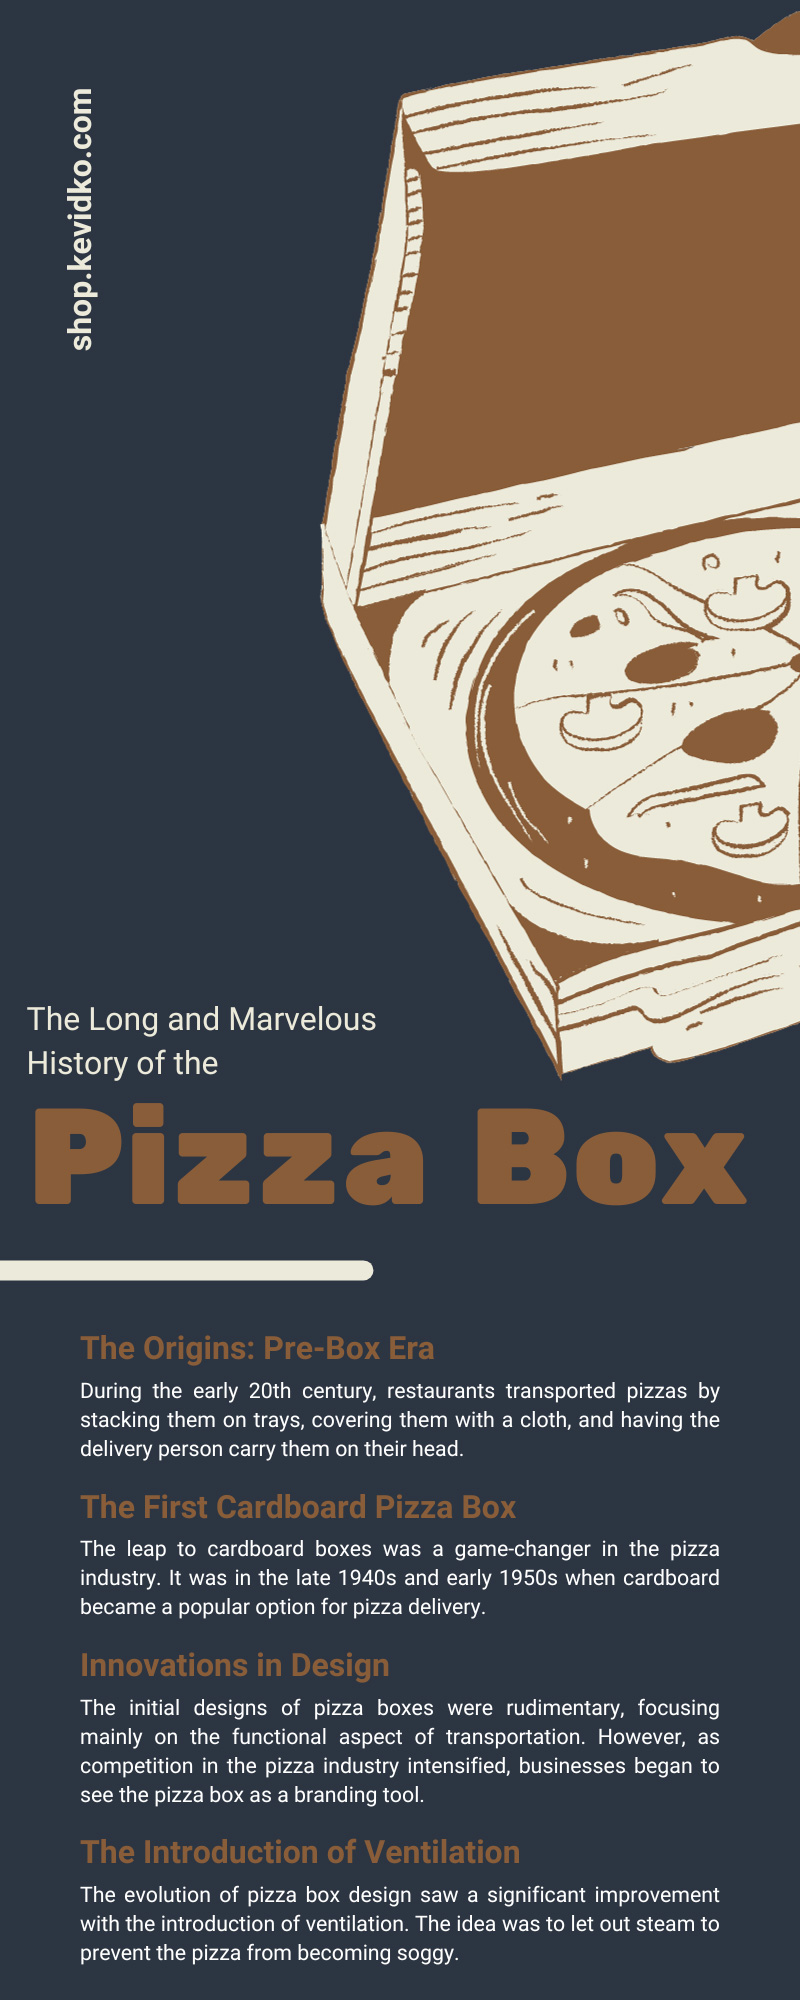 The Long and Marvelous History of the Pizza Box